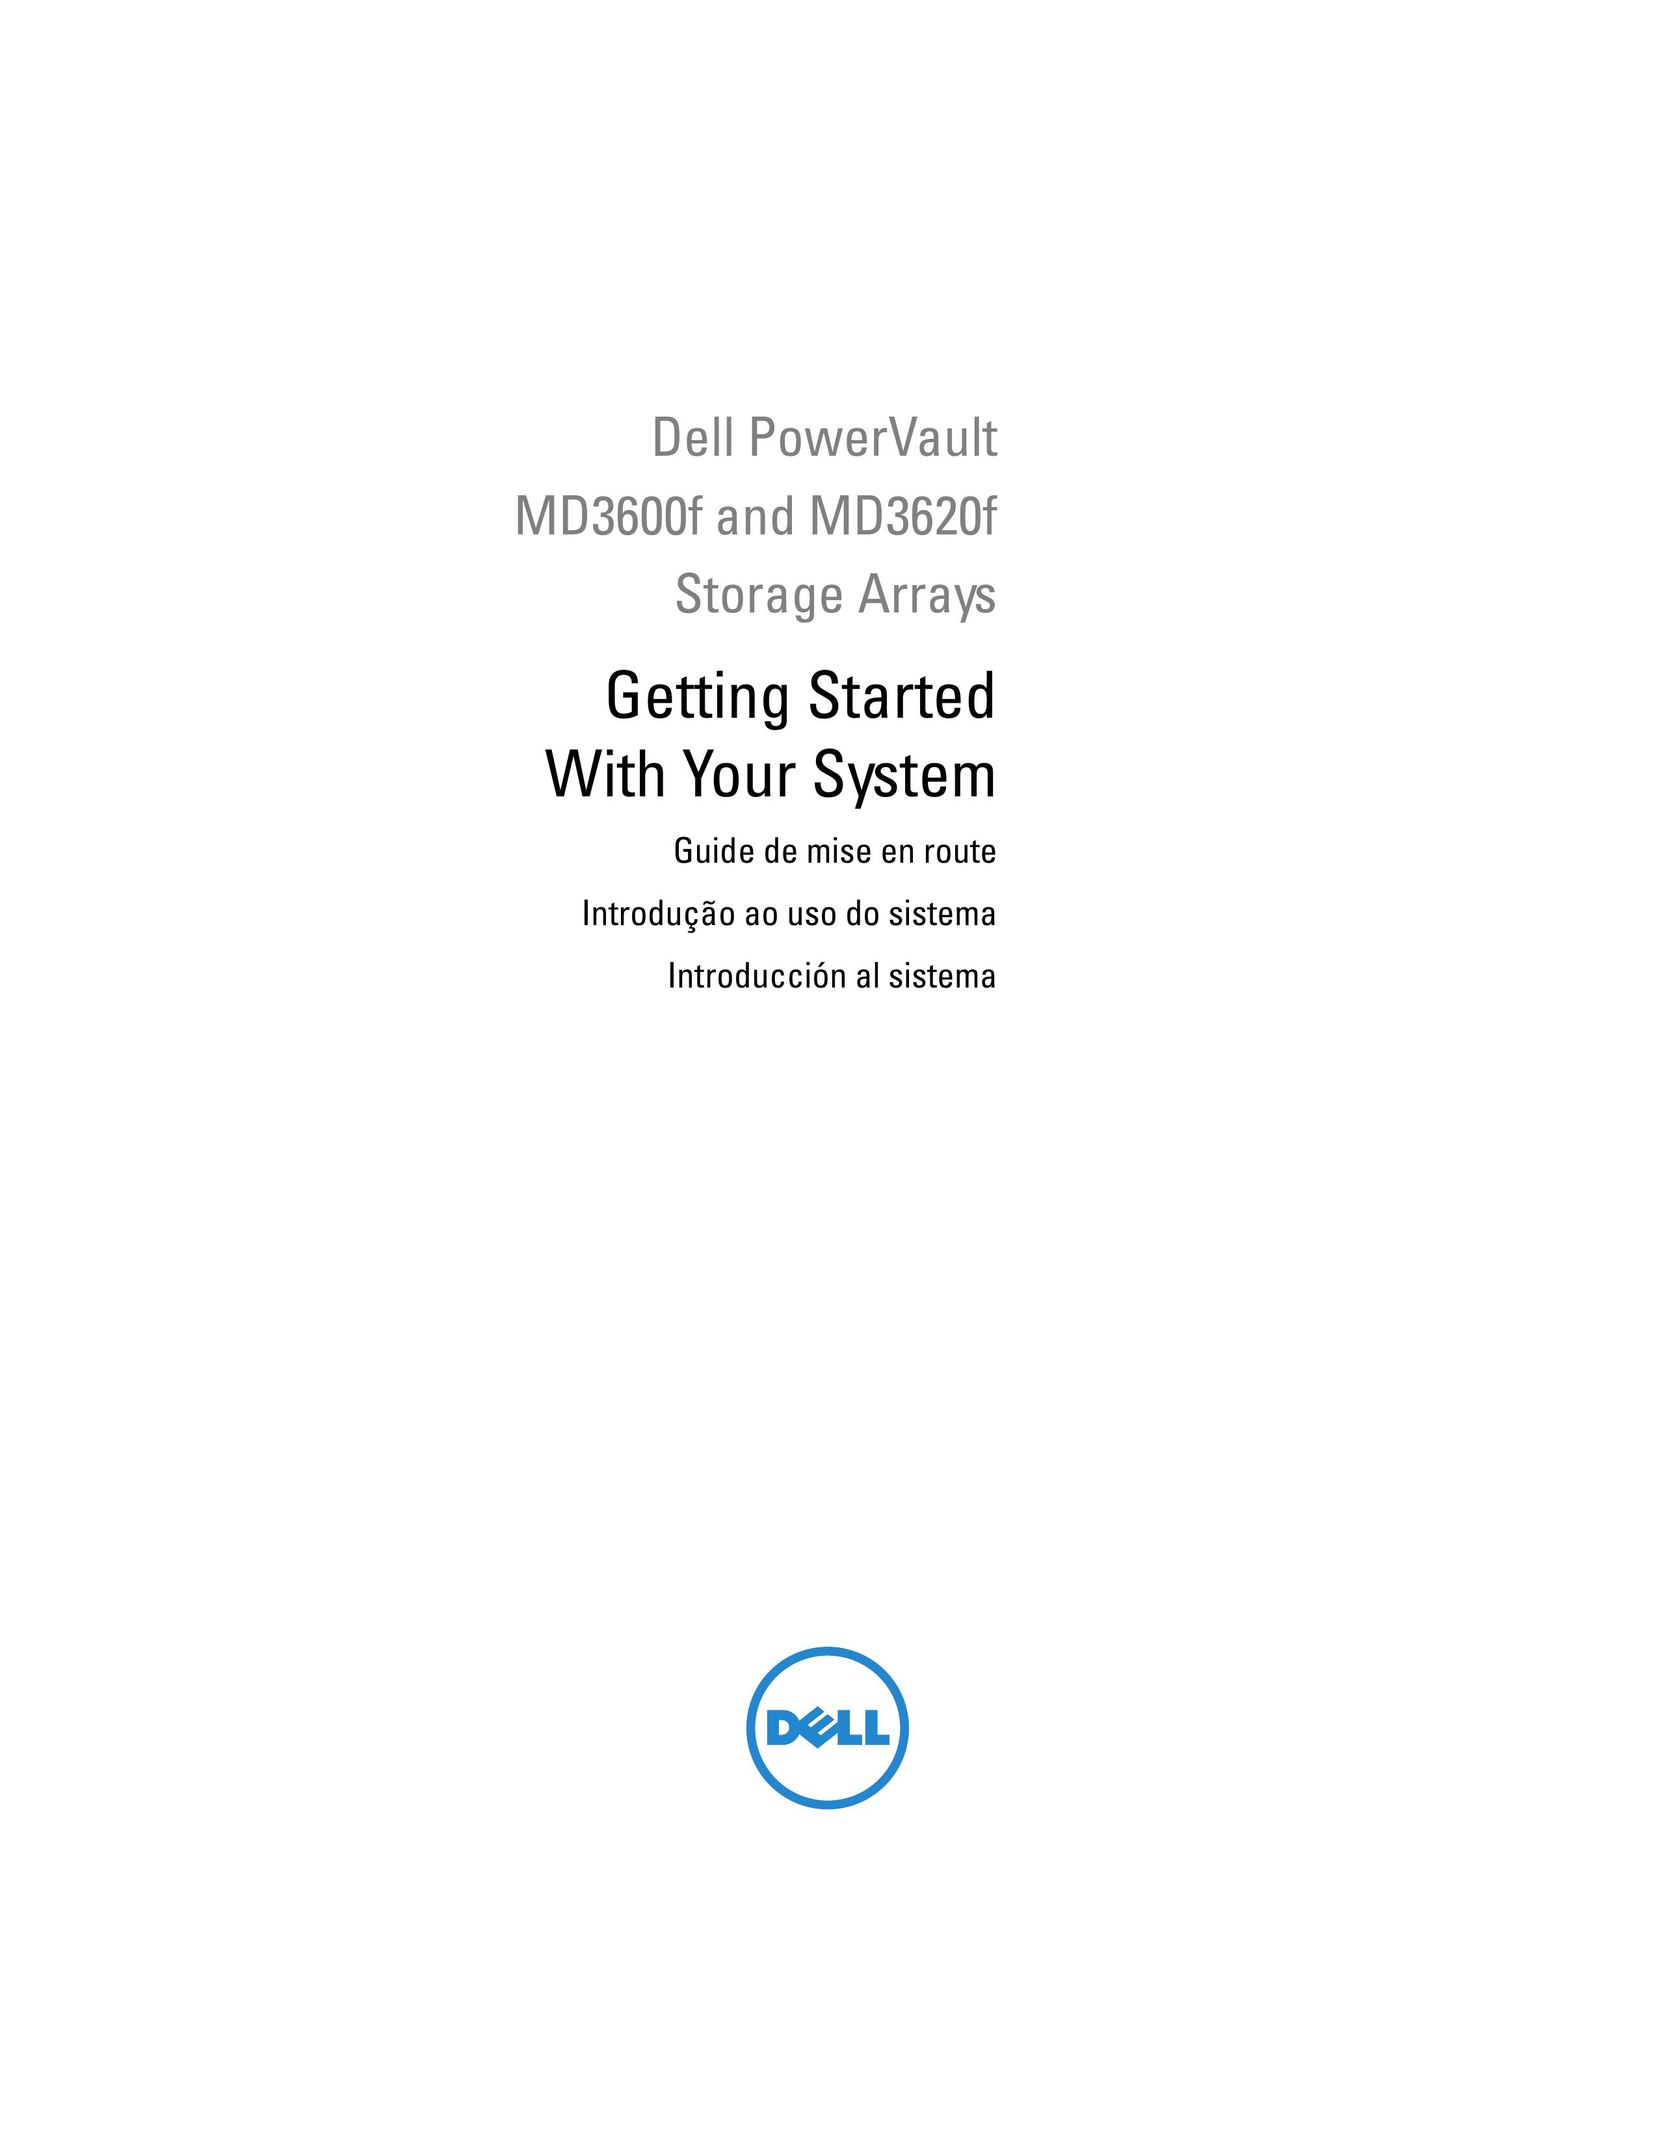 Dell MD3600f Tool Storage User Manual